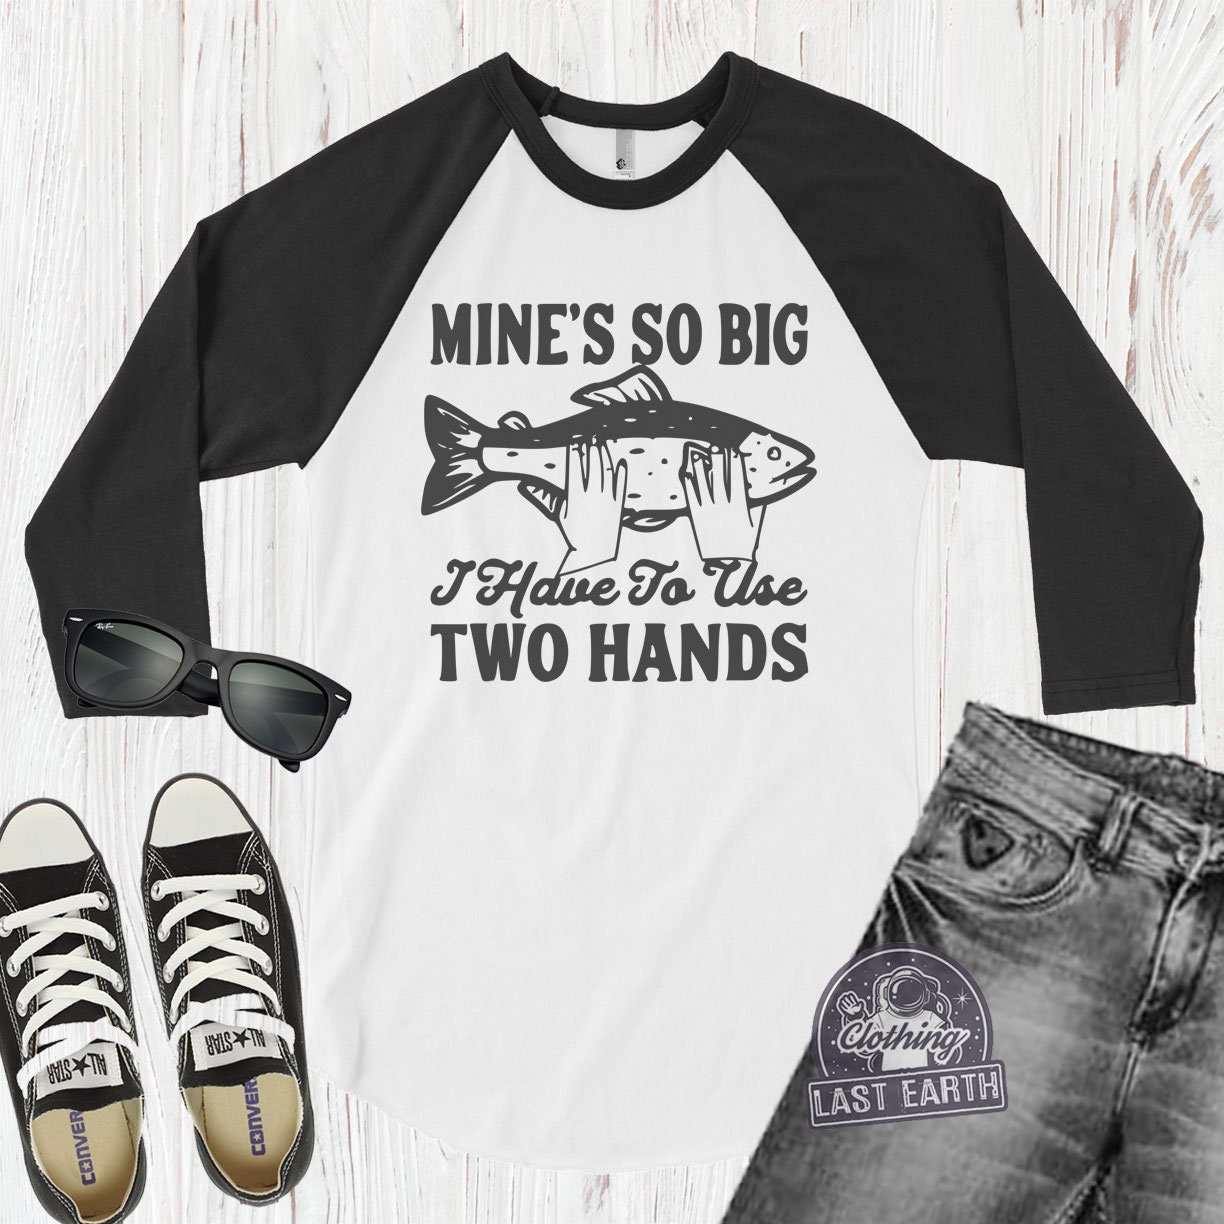 Fishing T Shirt, Funny Fishing Shirt, Fisherman Gifts, Sassy Quote Shirt,  Mine's so Big I Have to Use Two Hands Shirt, Gifts for Him -  Canada